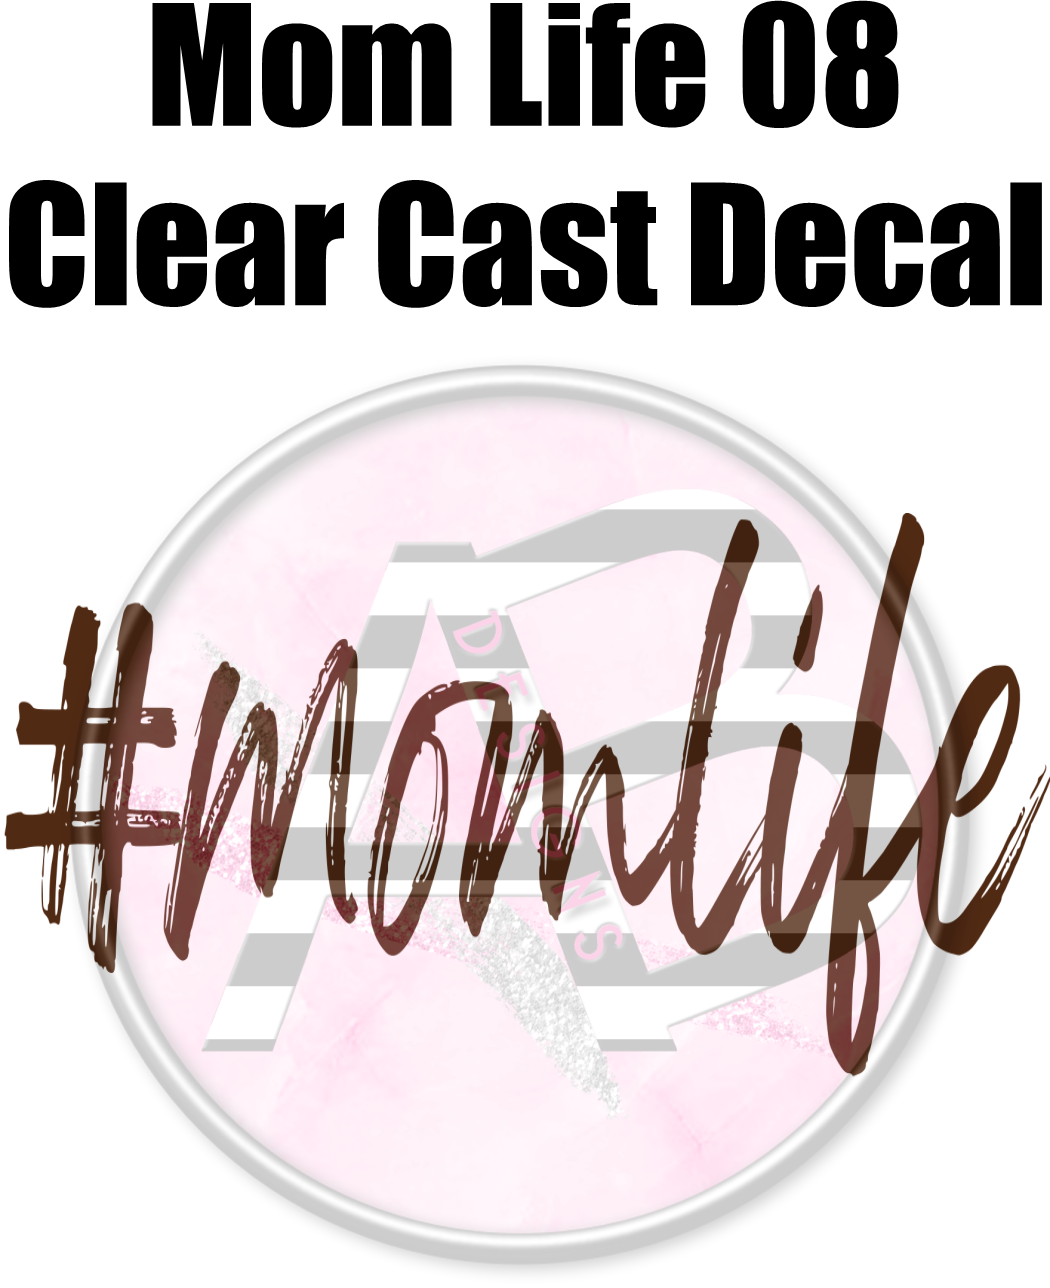 Mom Life 08 - Clear Cast Decal